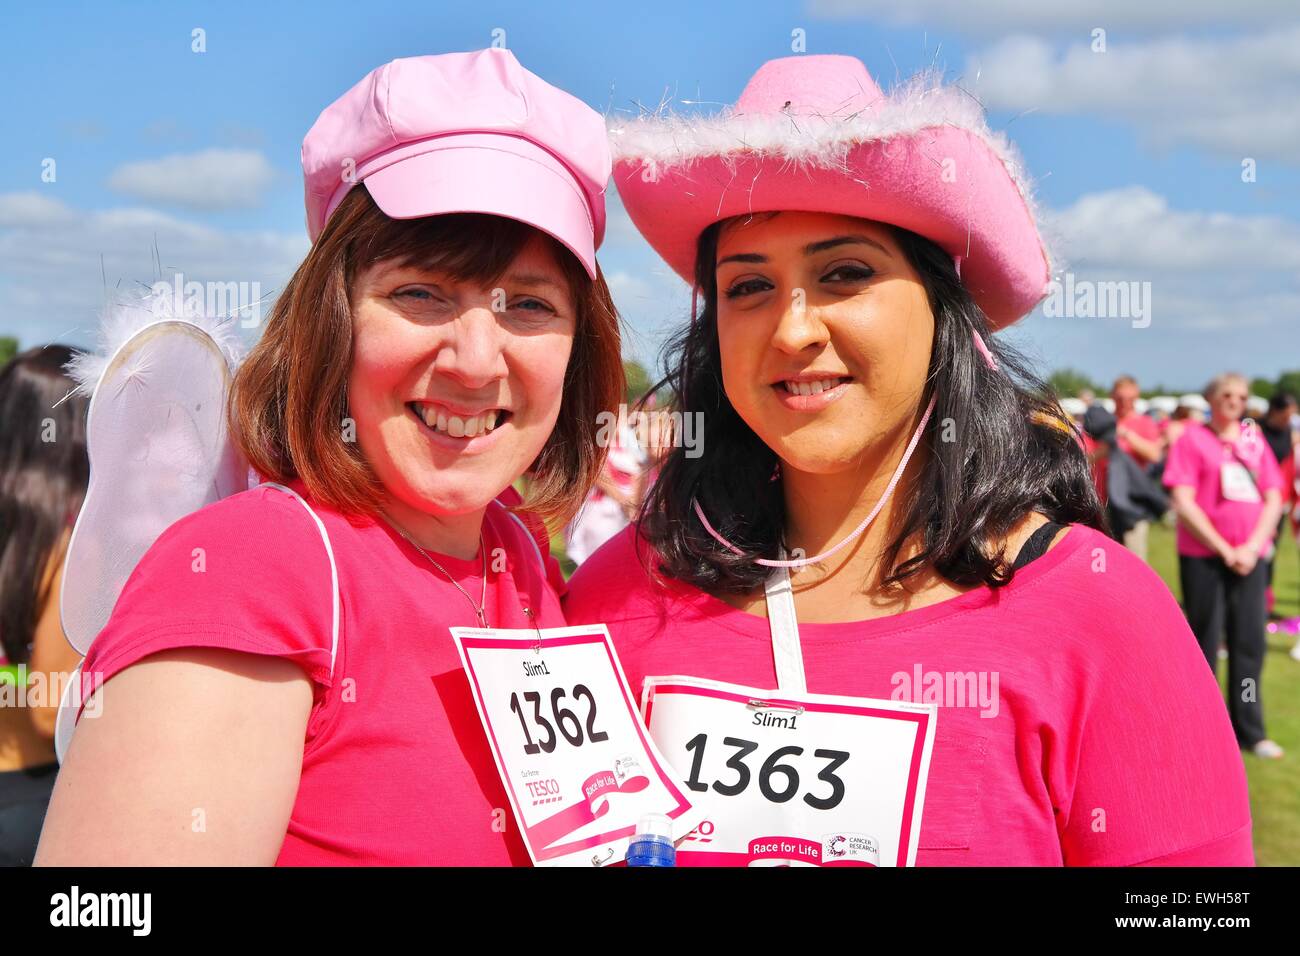 Race For Life - Sutton Coldfield, England - June 7 2015 Stock Photo